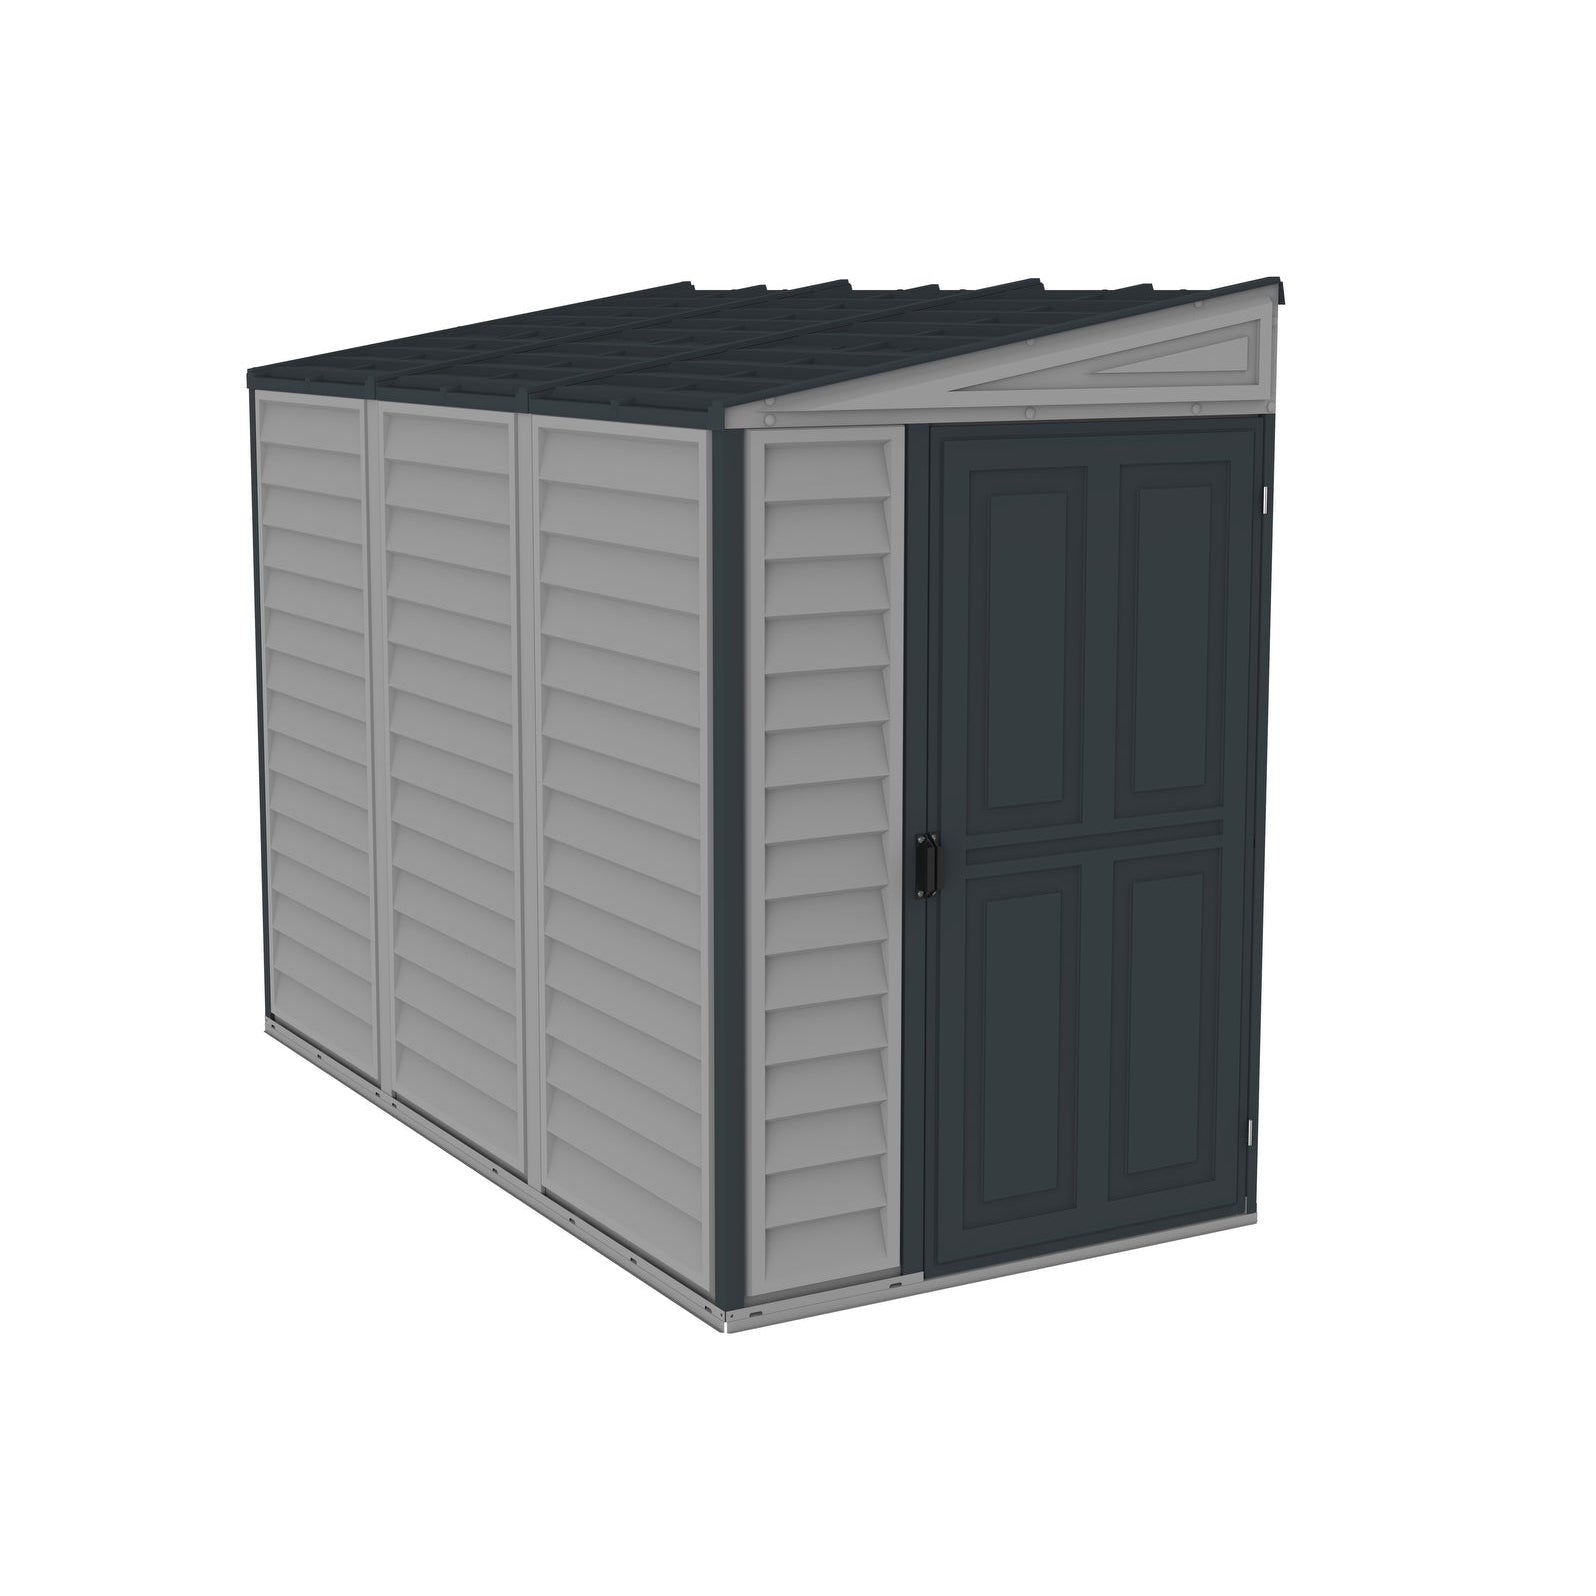 Duramax Vinyl Sheds Duramax 4ft x 8ft Sidemate PLUS Vinyl Resin Outdoor Storage Shed  With Foundation Kit